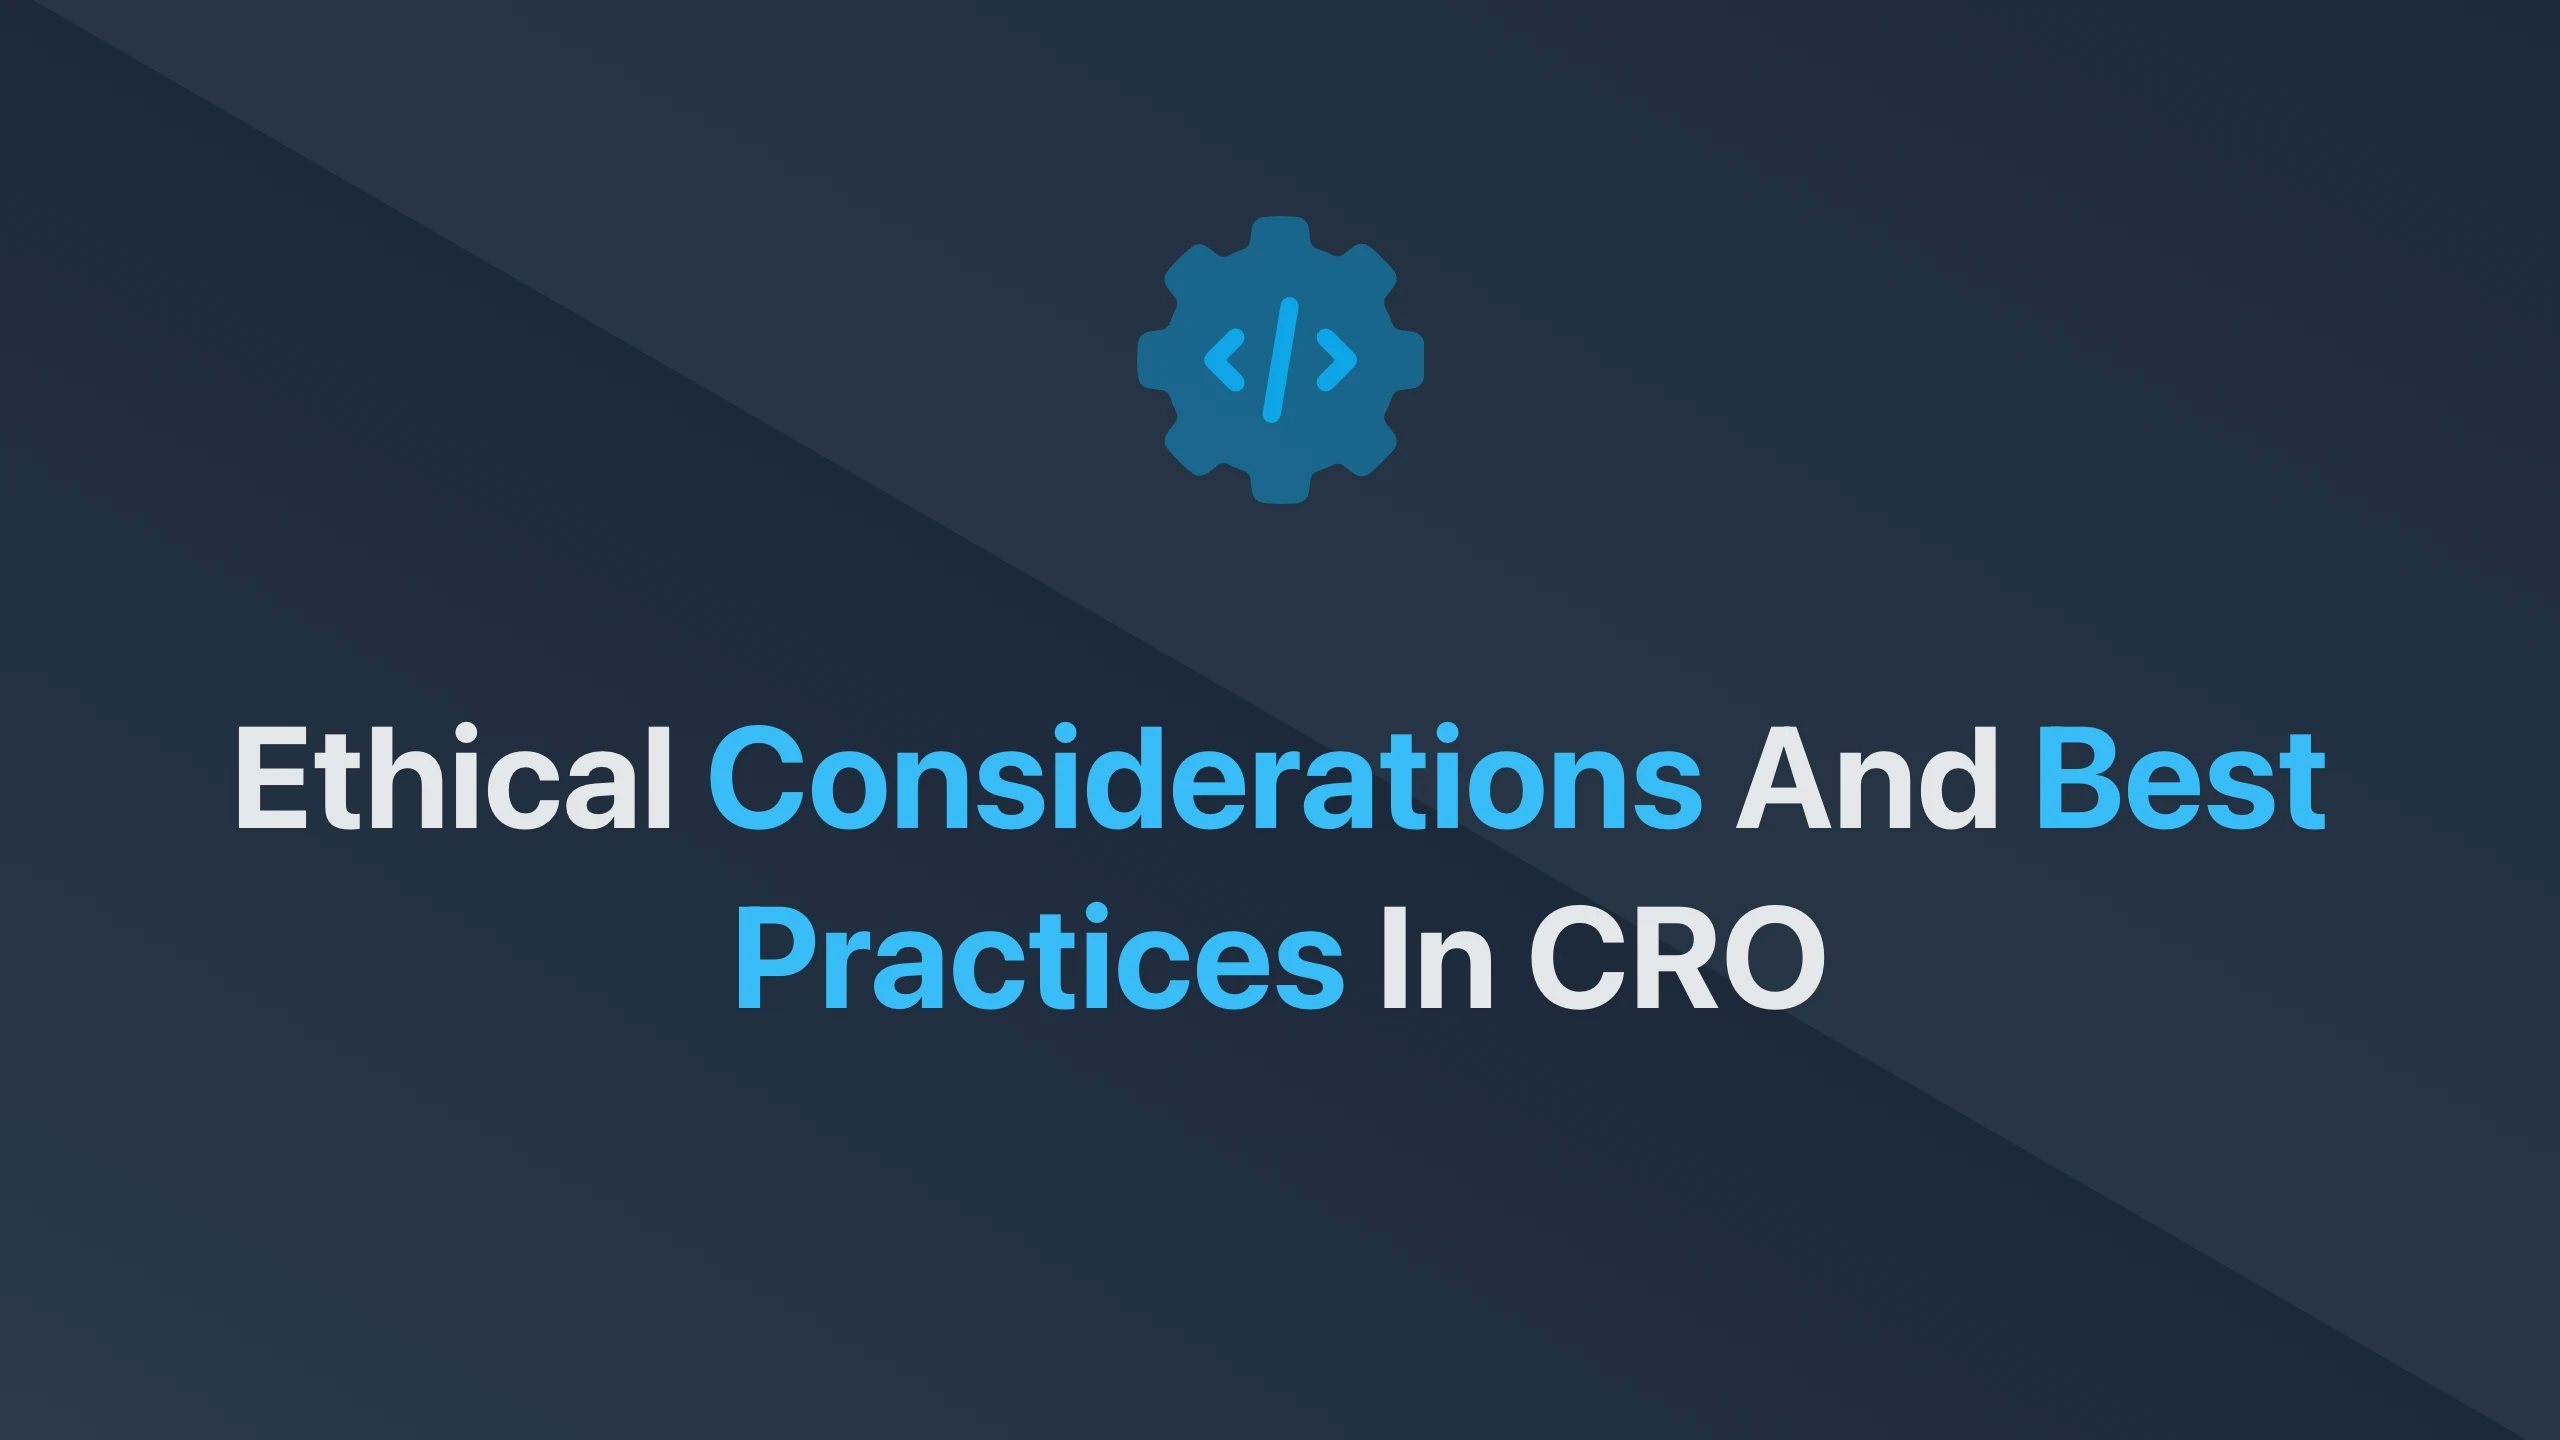 Cover Image for Ethical Considerations and Best Practices in CRO